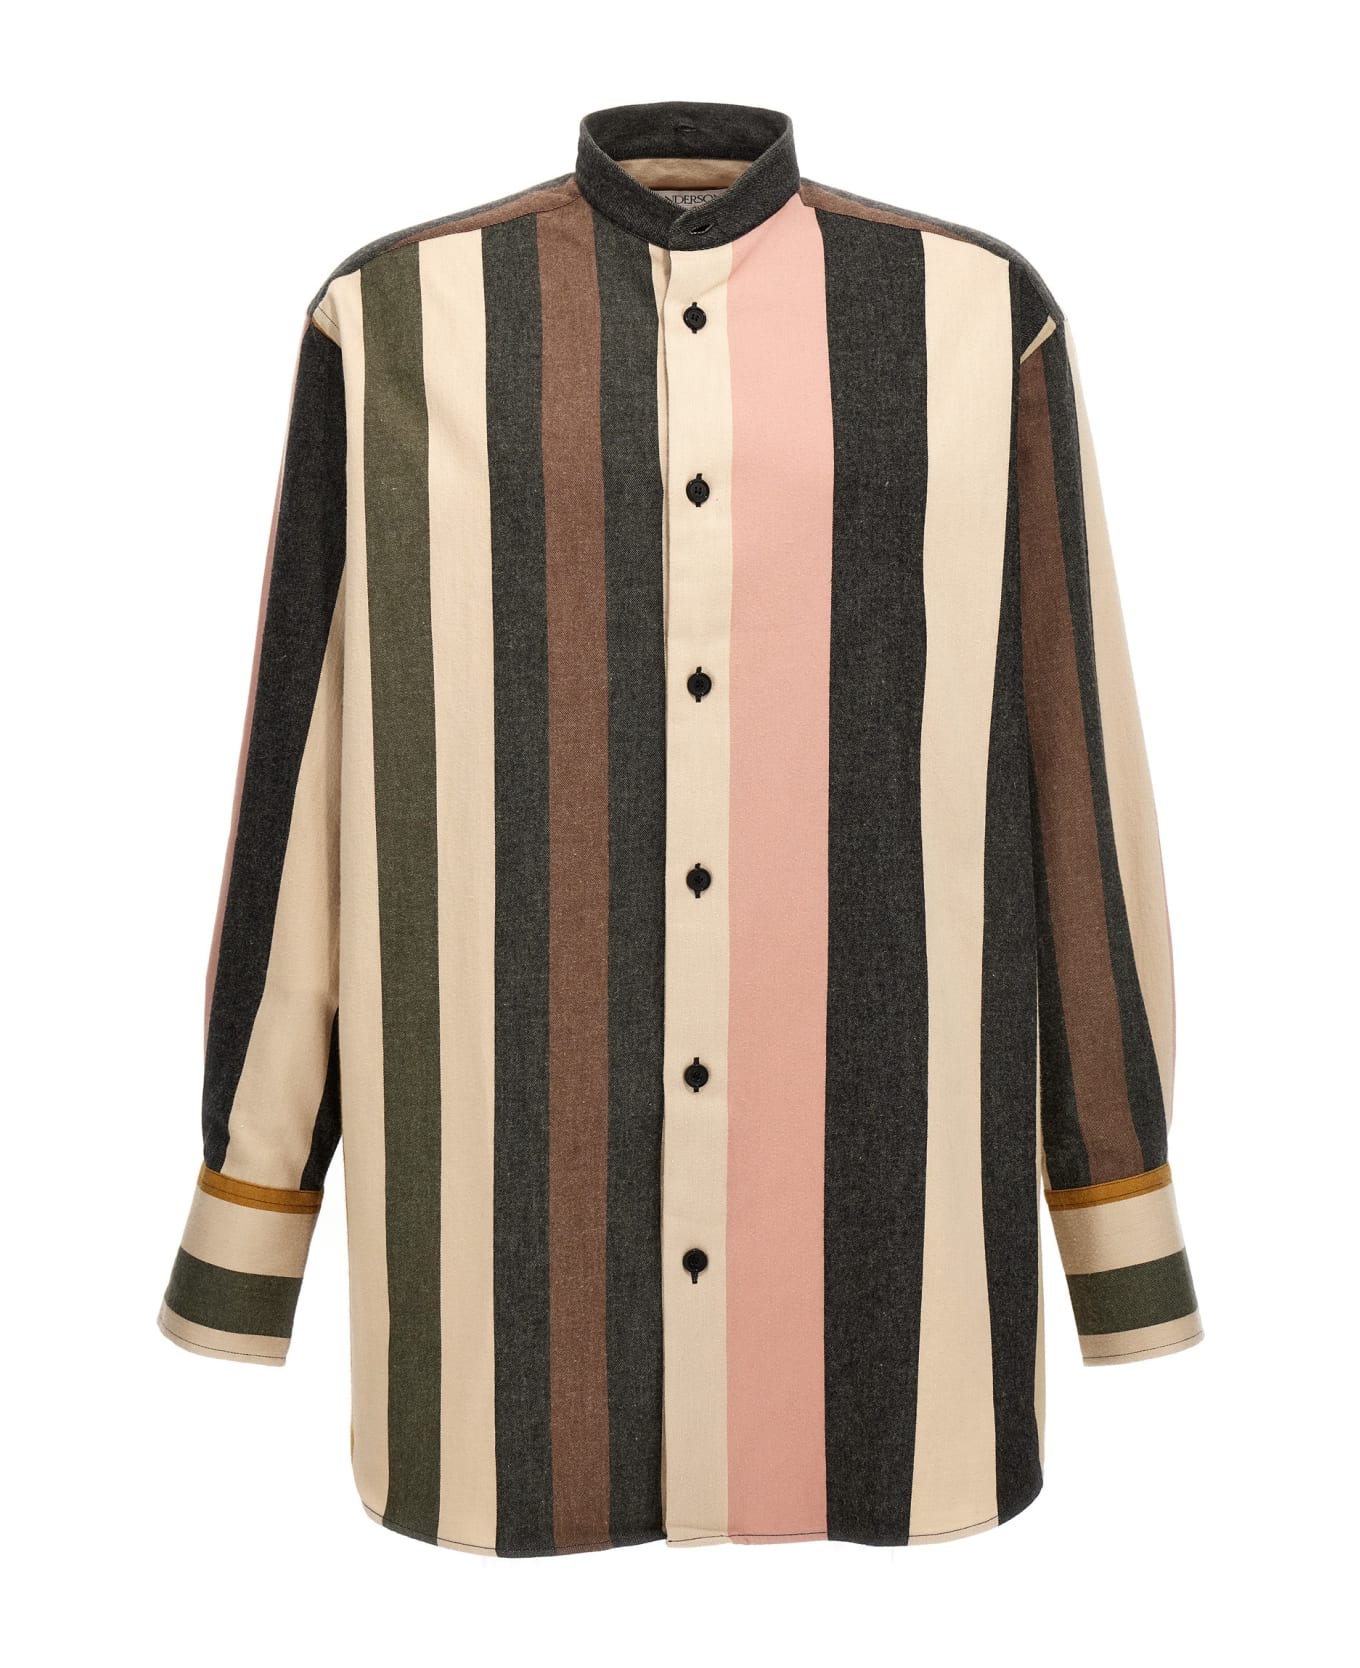 J.W. Anderson Logo Embroidered Striped Shirt - Flax Multi